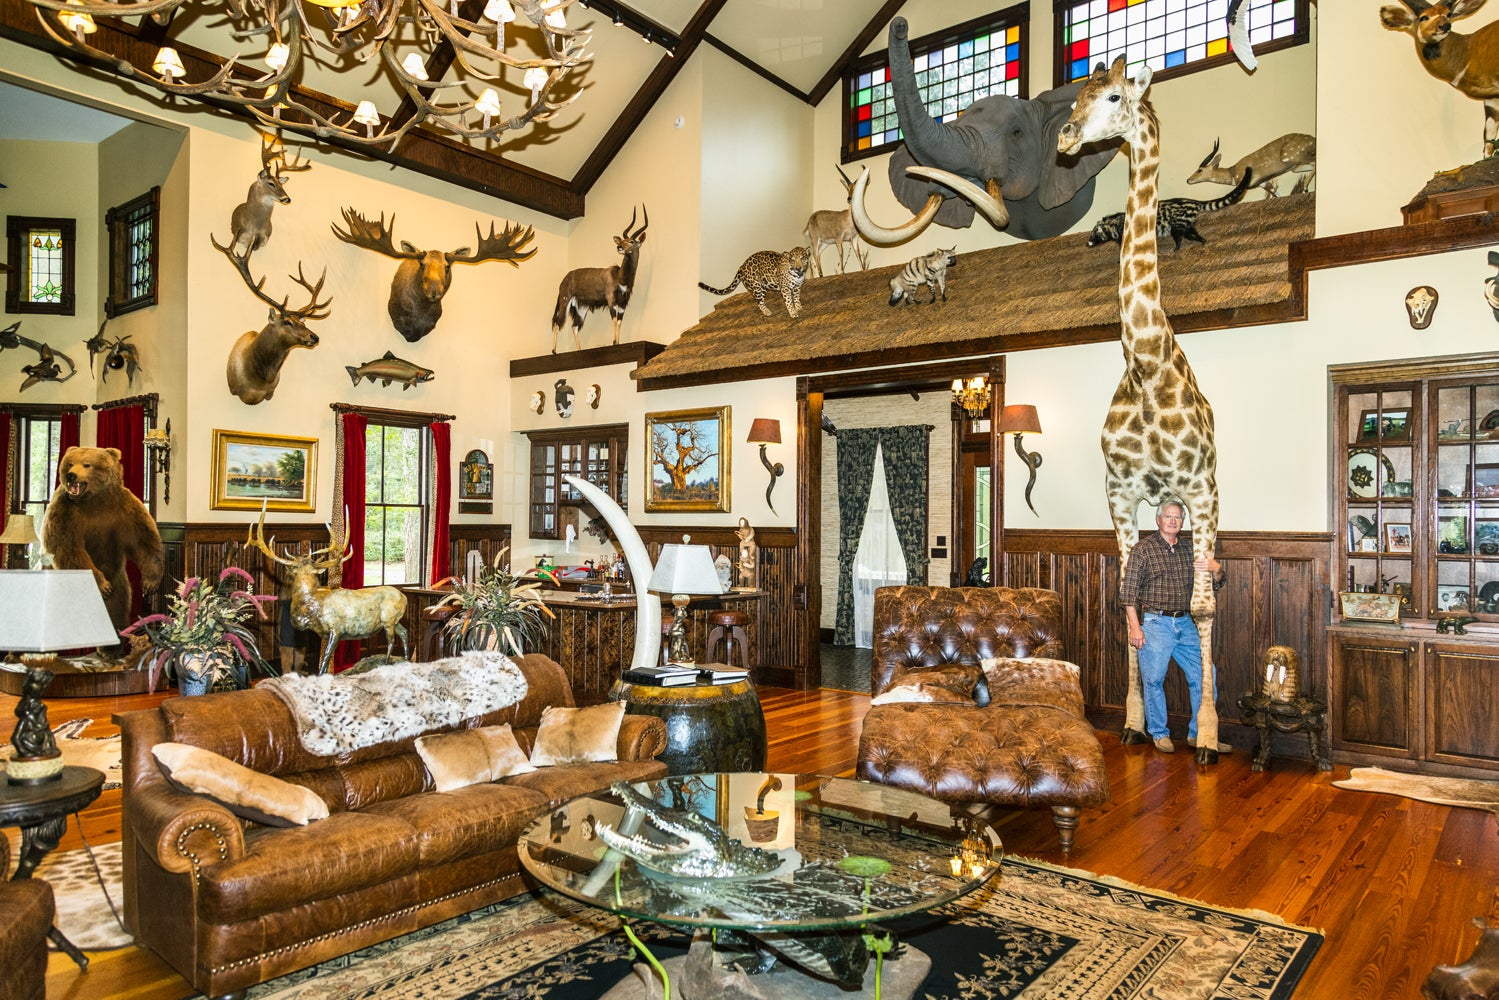 Interior of room filled with taxidermy.